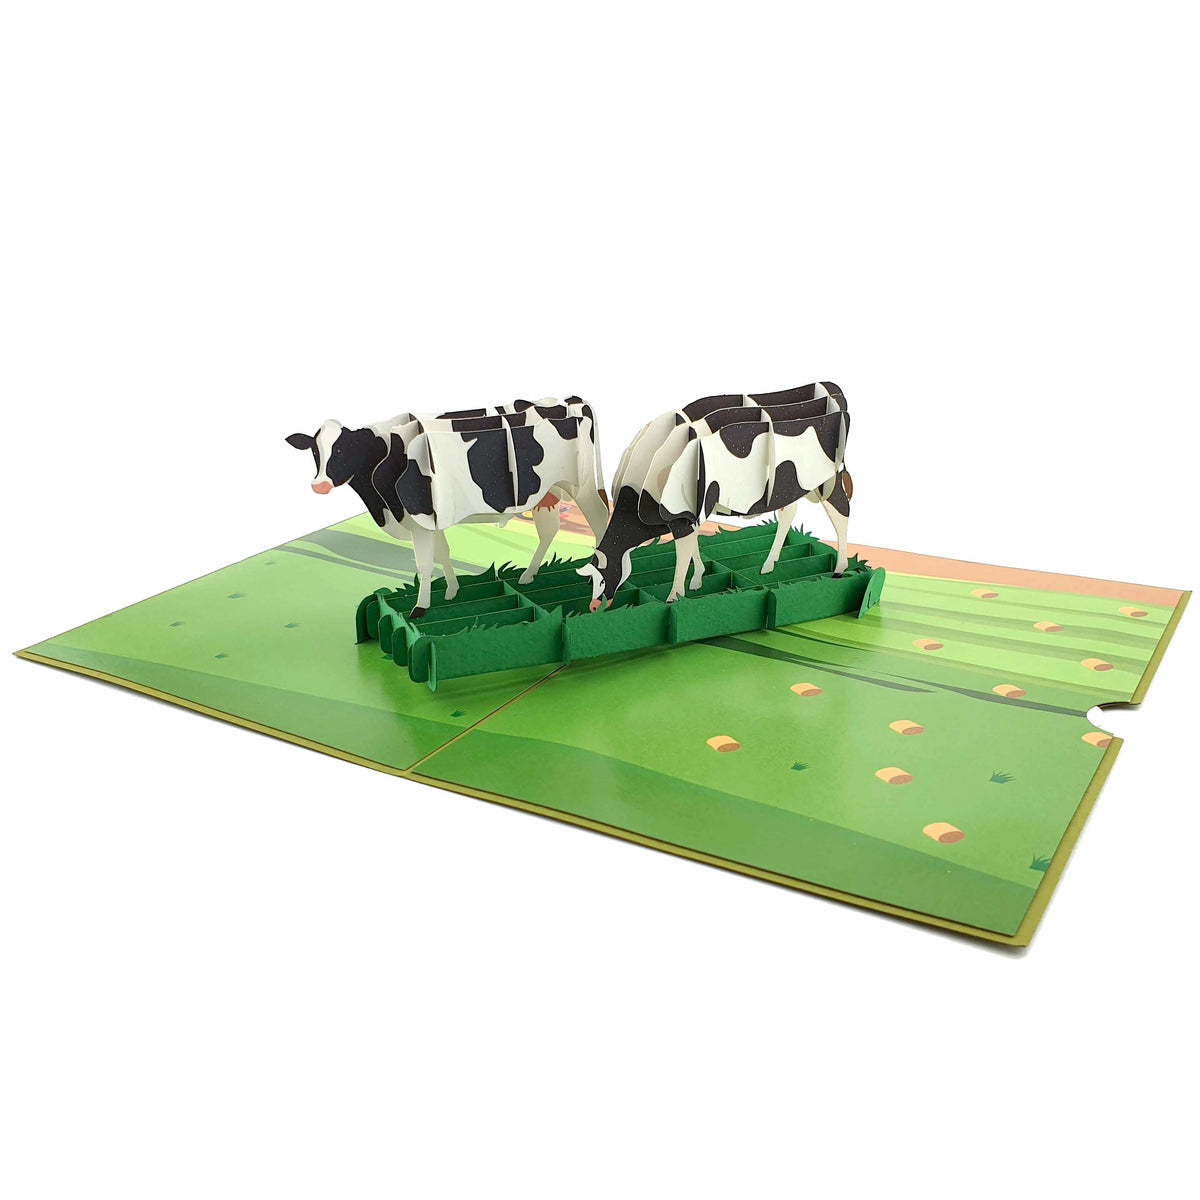 Cows Pop Up Card